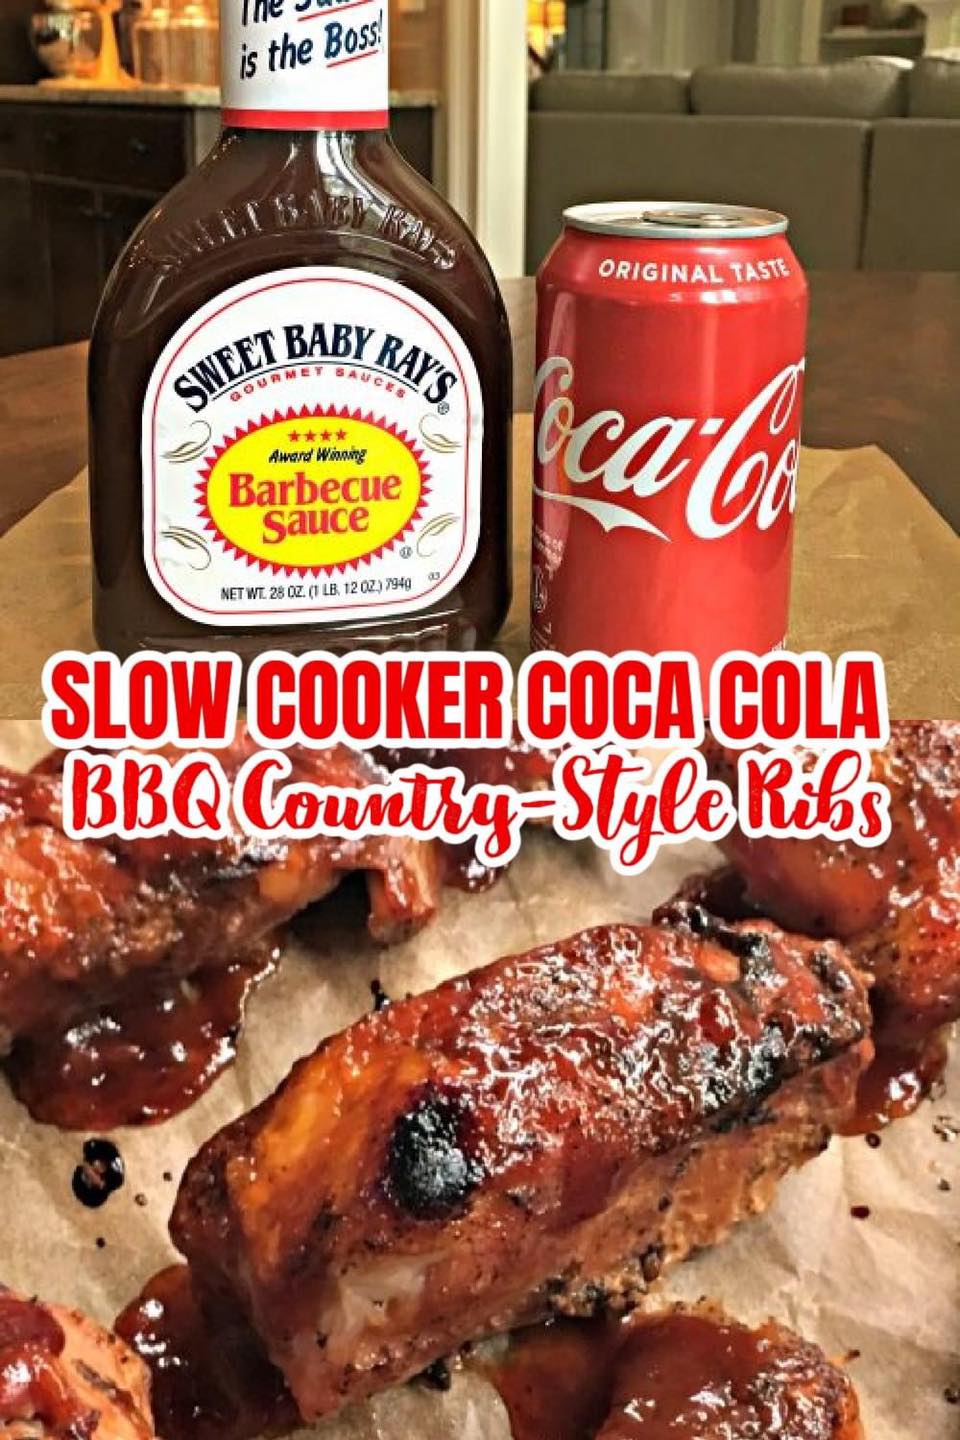 Two photo Collage - top photo is a bottle of Sweet Baby Ray's Barbecue Sauce and a can of Coke. Bottom Photo is cooked ribs on parchment paper.